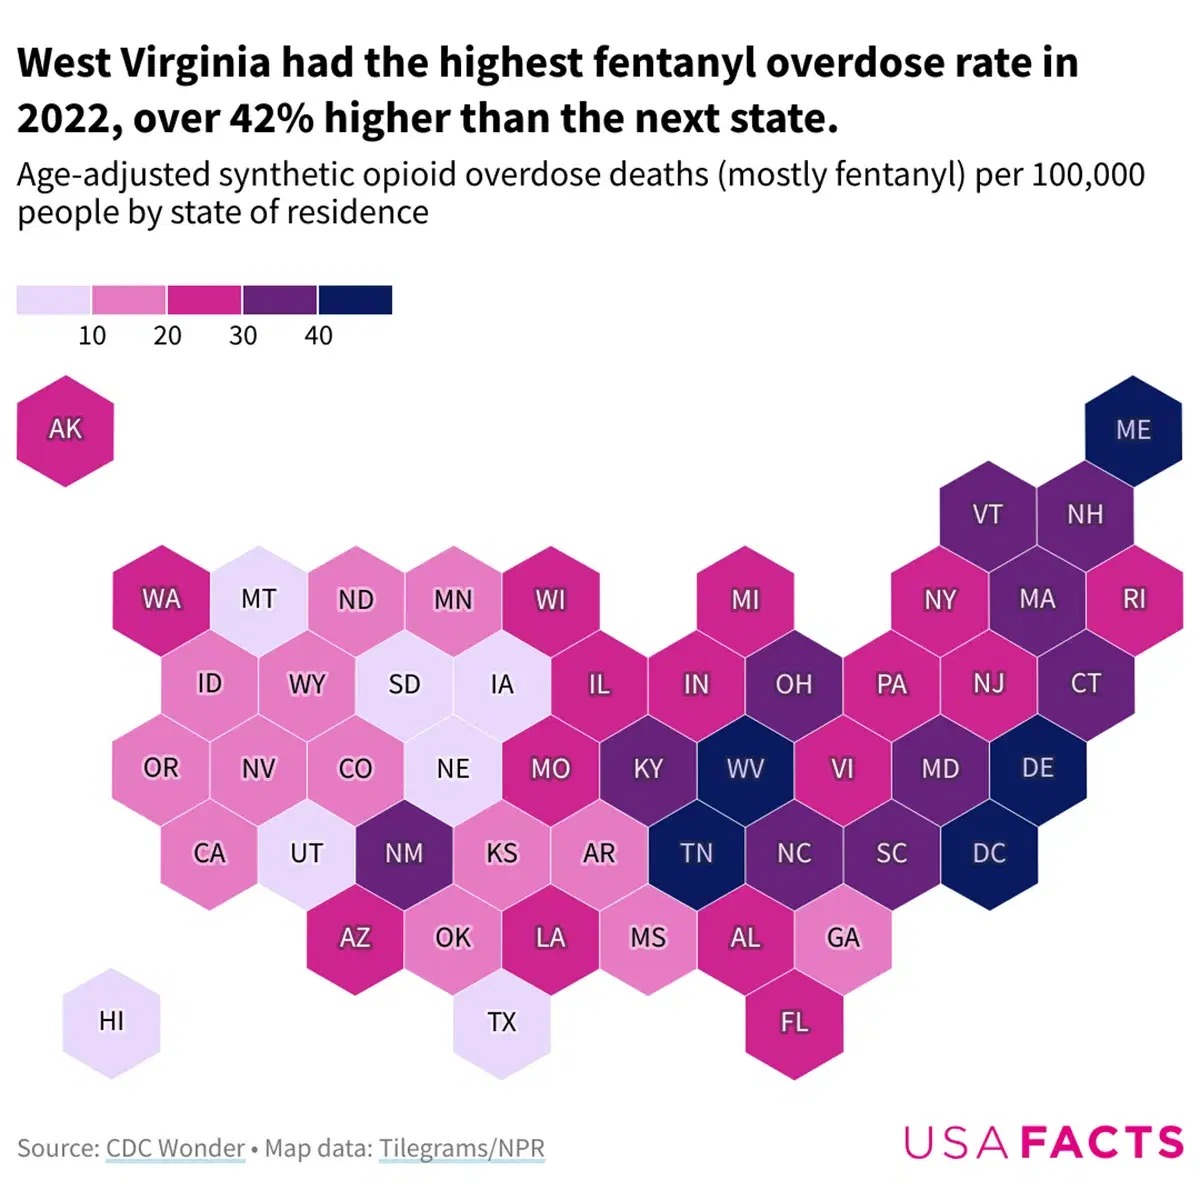 Which states are losing the most people to fentanyl?